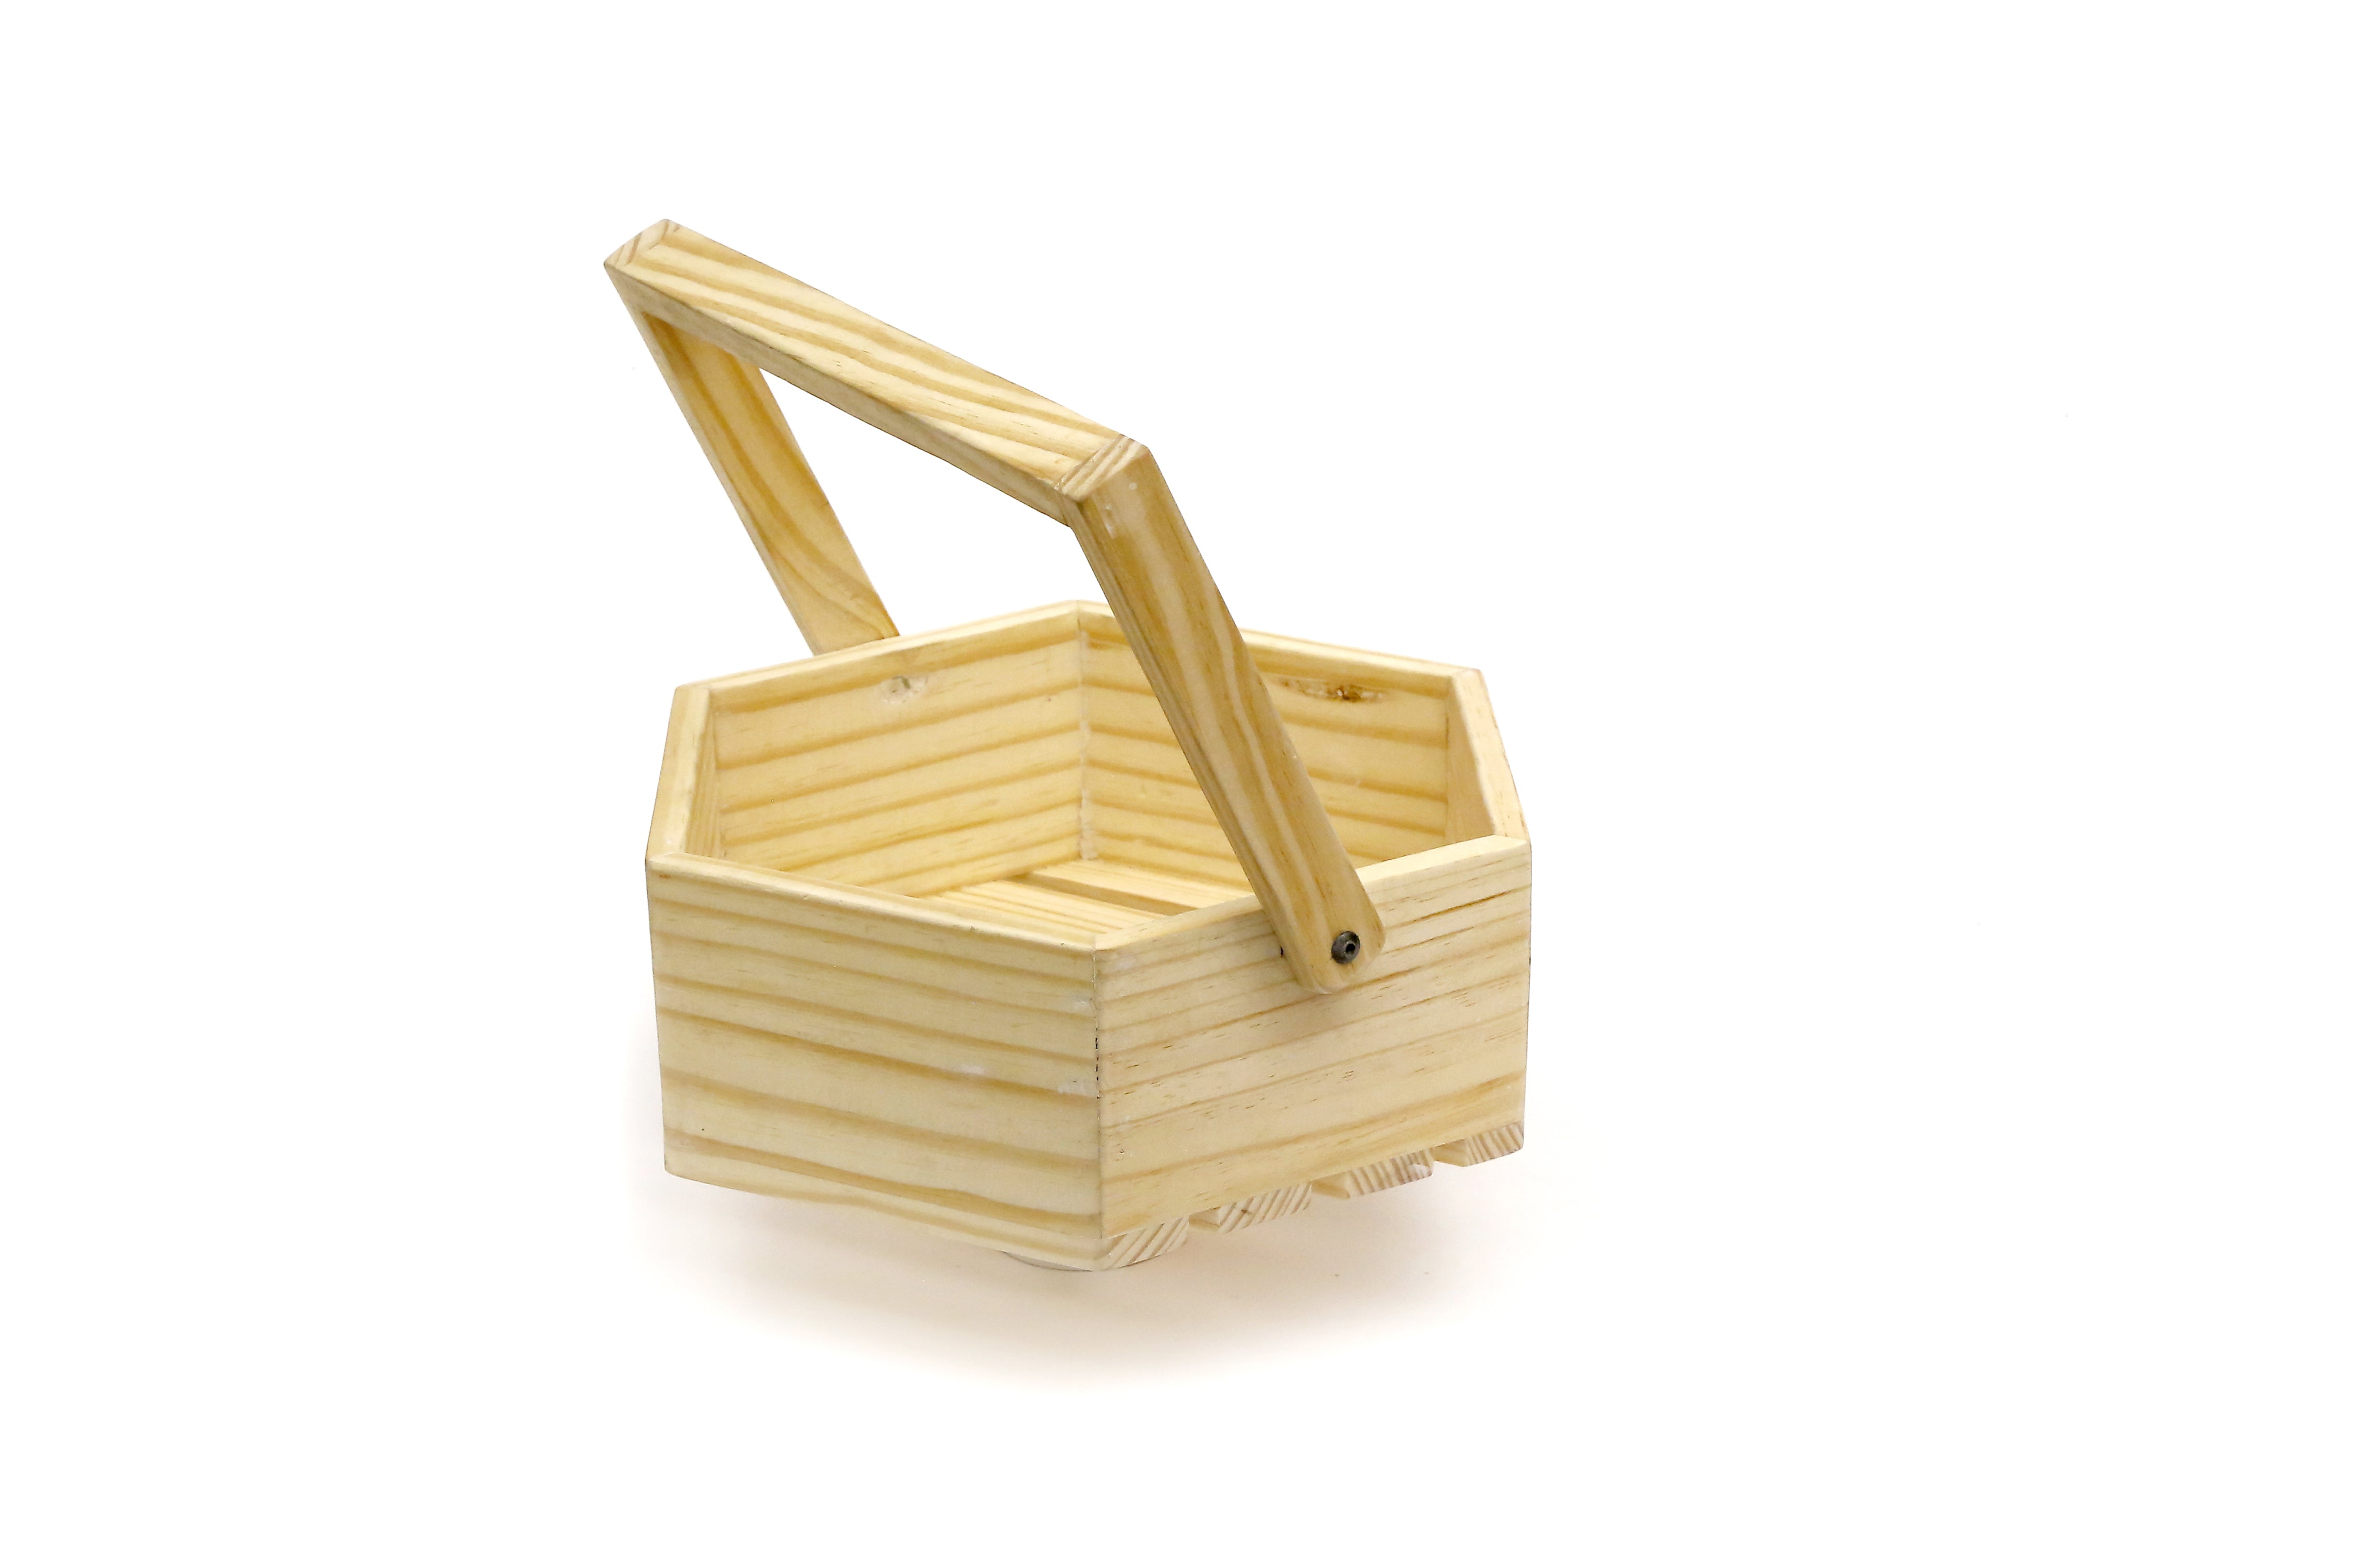 Wooden Hexagonal Tray with Handle Crate